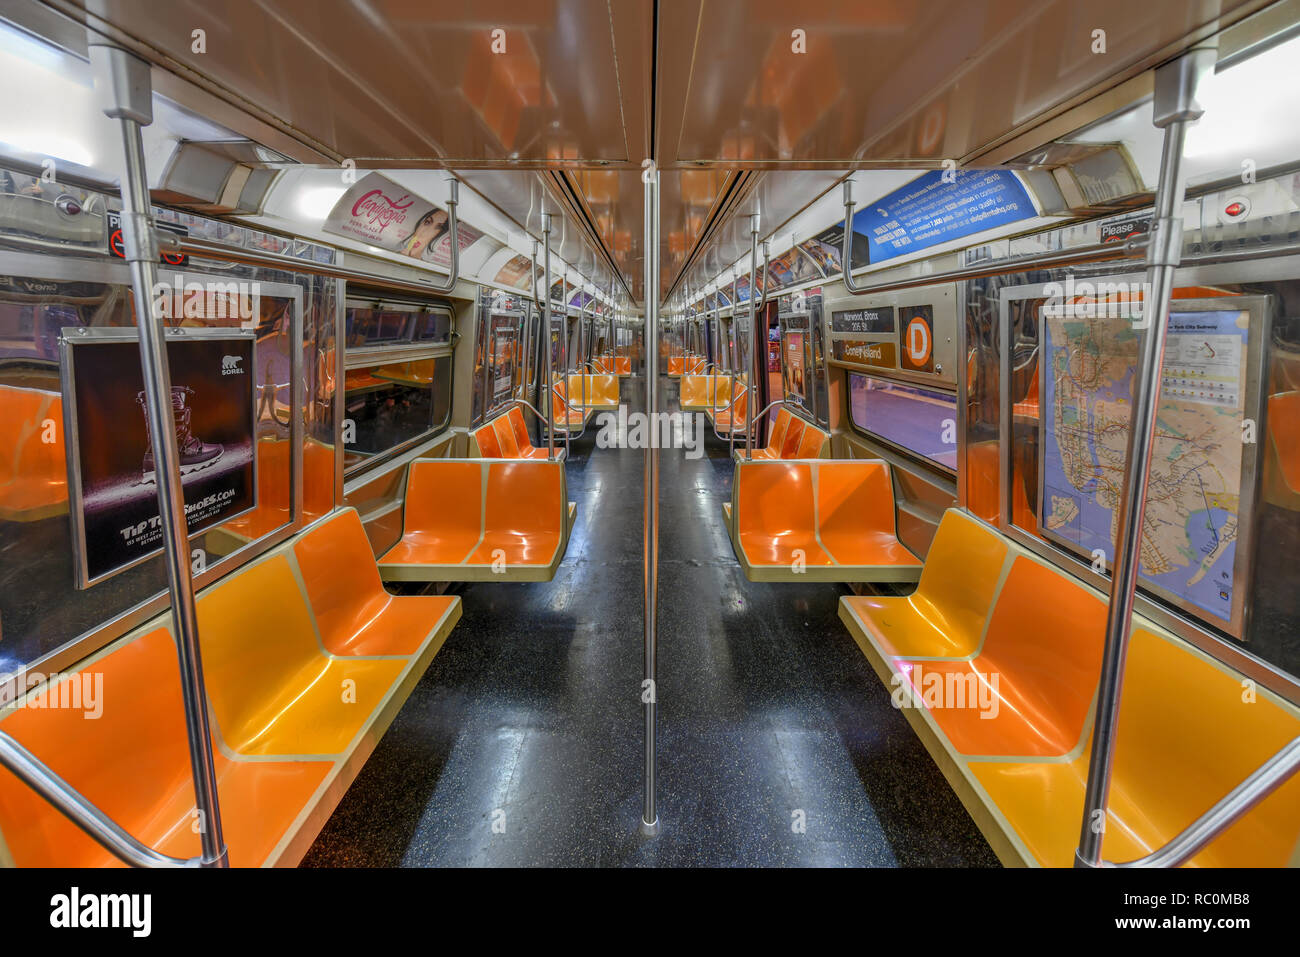 New York City - December 8, 2018: Empty train car in the New York City transit system. Stock Photo